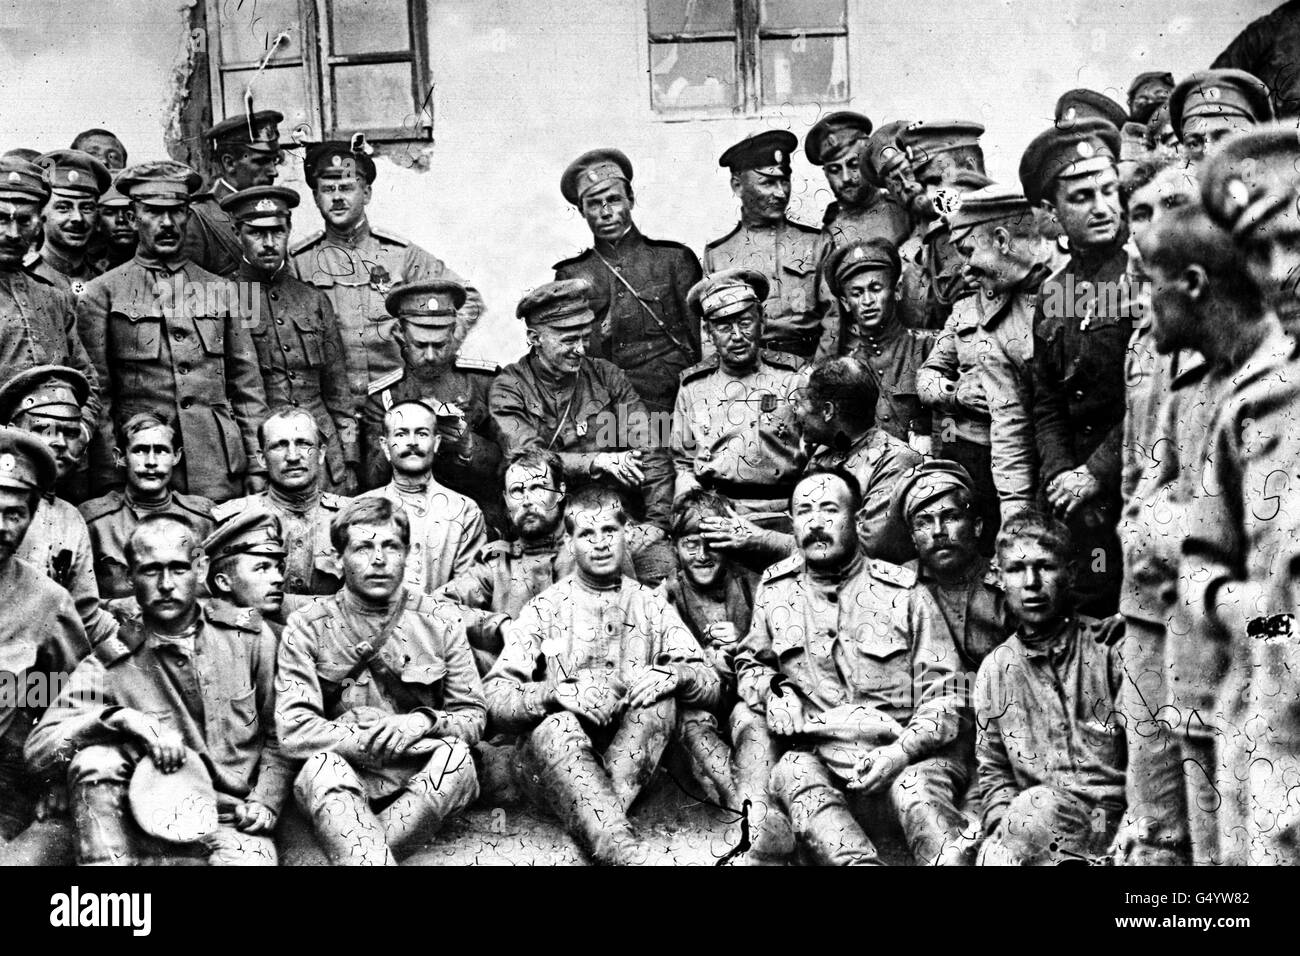 Aleksandr Kerensky (1881-1970): He is seen in the centre of the group with finger raised, joking with a Russian soldier. Kerensky was a Russian Liberal Revolutionary leader and Prime Minister of the Provisional Government from July - October 1917. * Pictured during a visit to the Russian Front to encourage the troops, during the First world War. He was overthrown during the Bolshevik October Revolution. Stock Photo